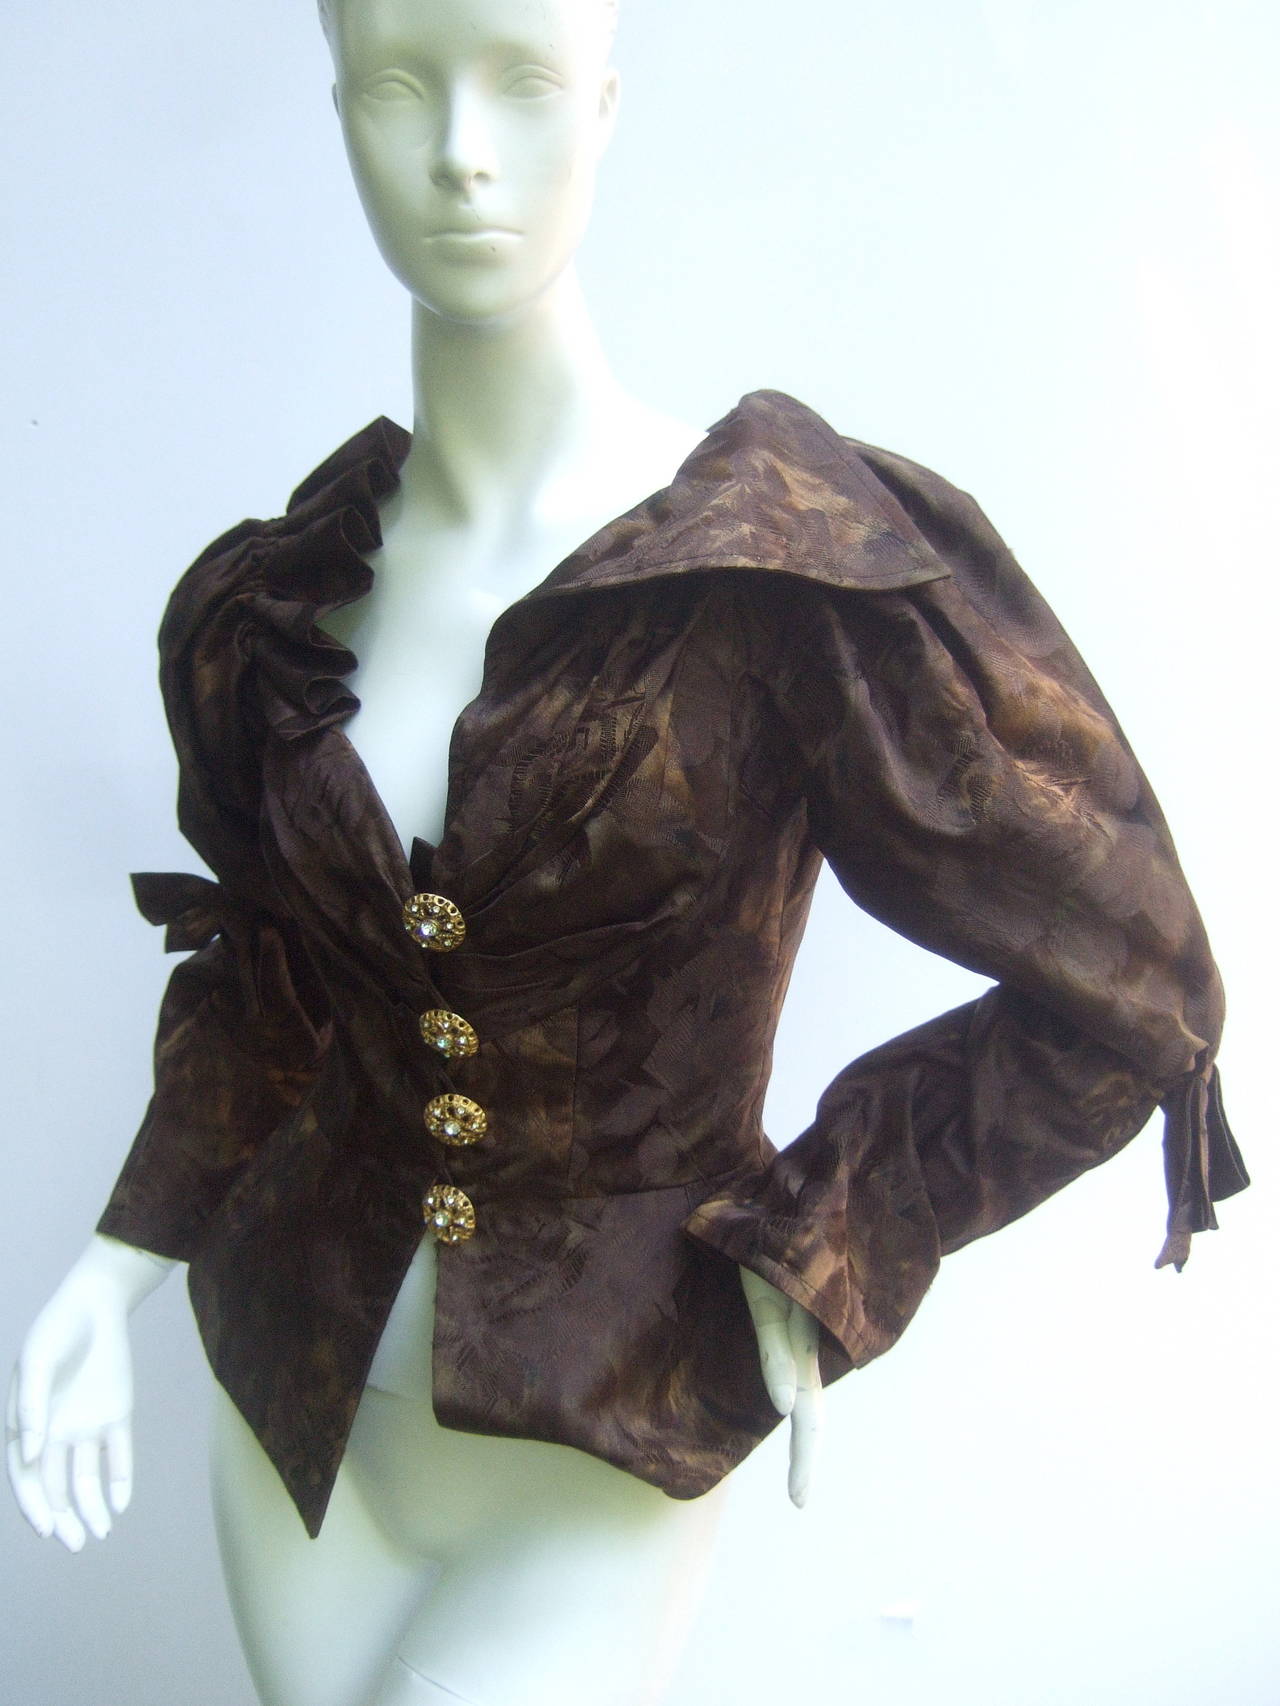 Christian Lacroix Paris Fabulous brown silk jacket Size 38
The edgy high fashion jacket is designed with luxurious
silk brocade in a myriad of copper brown hues with 
small black patches

One side of the dramatic collar has ruched pleating
the